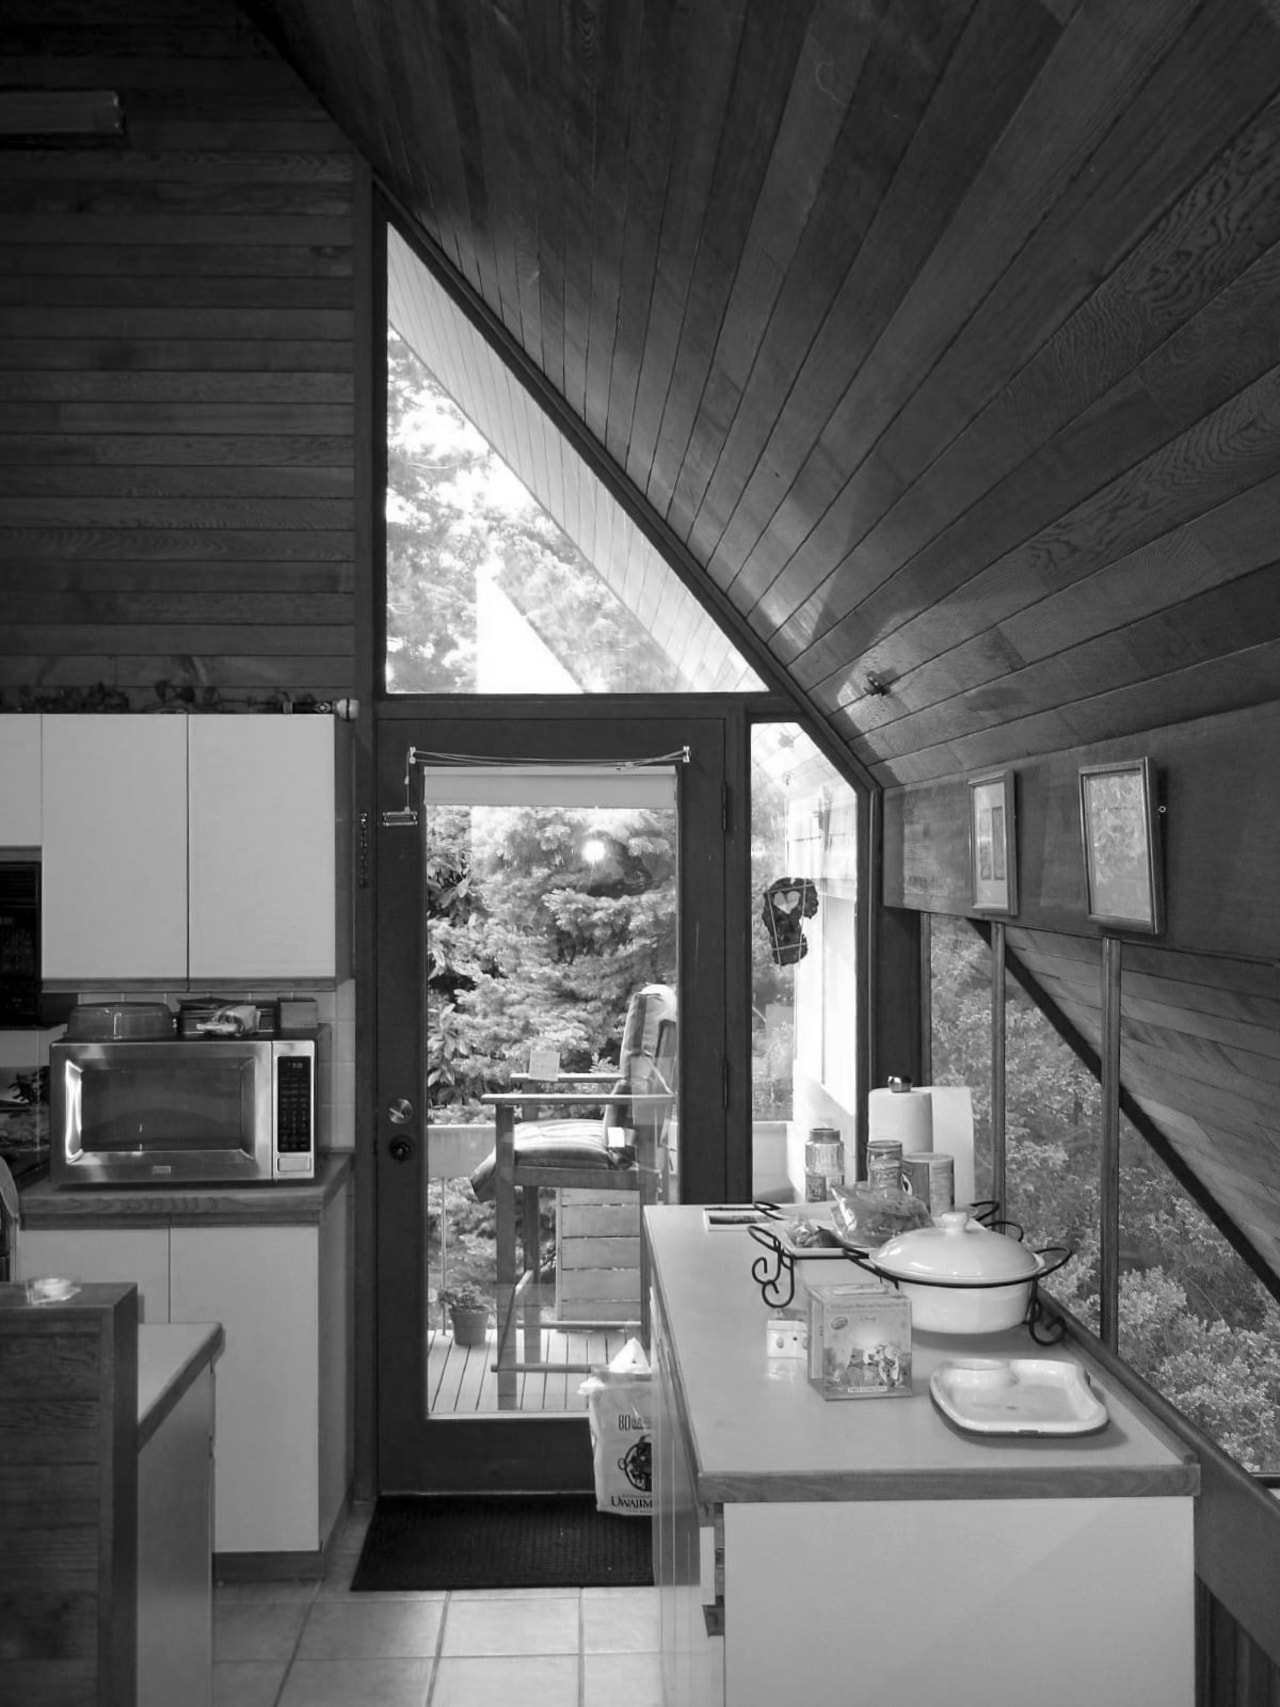 Detail image of the original kitchen in a architecture, black and white, daylighting, home, house, interior design, monochrome, monochrome photography, window, black, gray